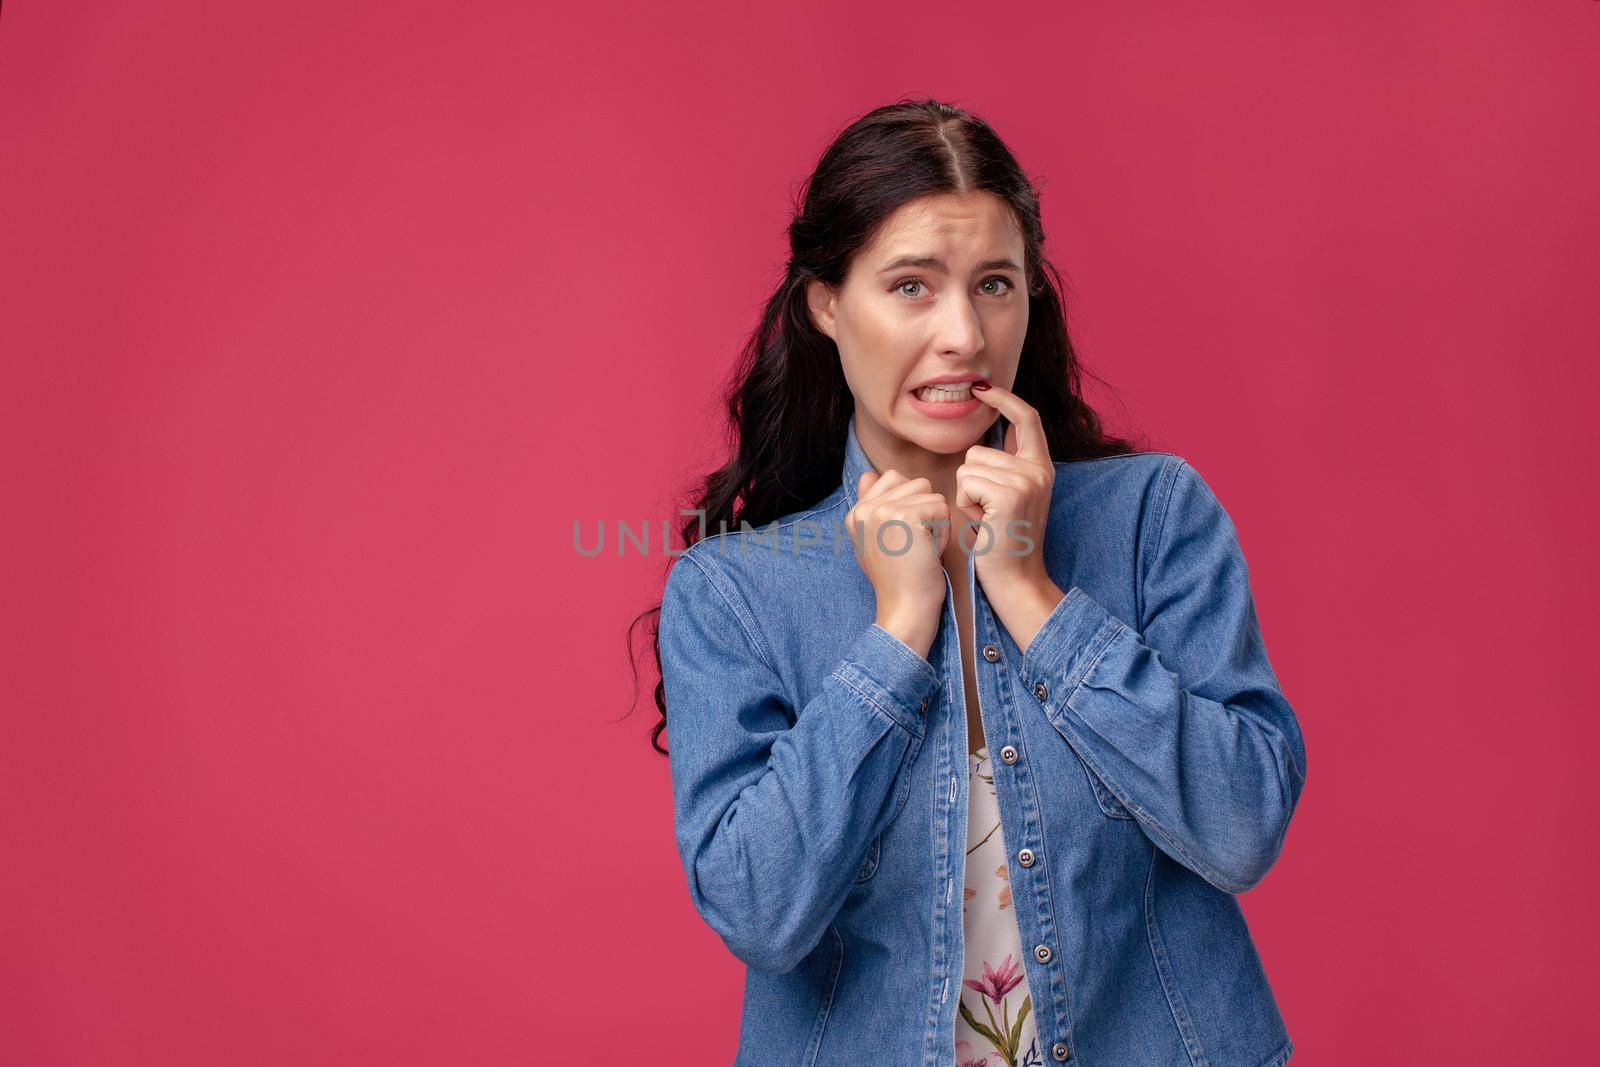 Portrait of a charming woman in a white dress with floral print. She is holding a collar of her blue denim shirt and touching her teeth standing on a pink wall background in studio. People sincere emotions, lifestyle concept. Mockup copy space.